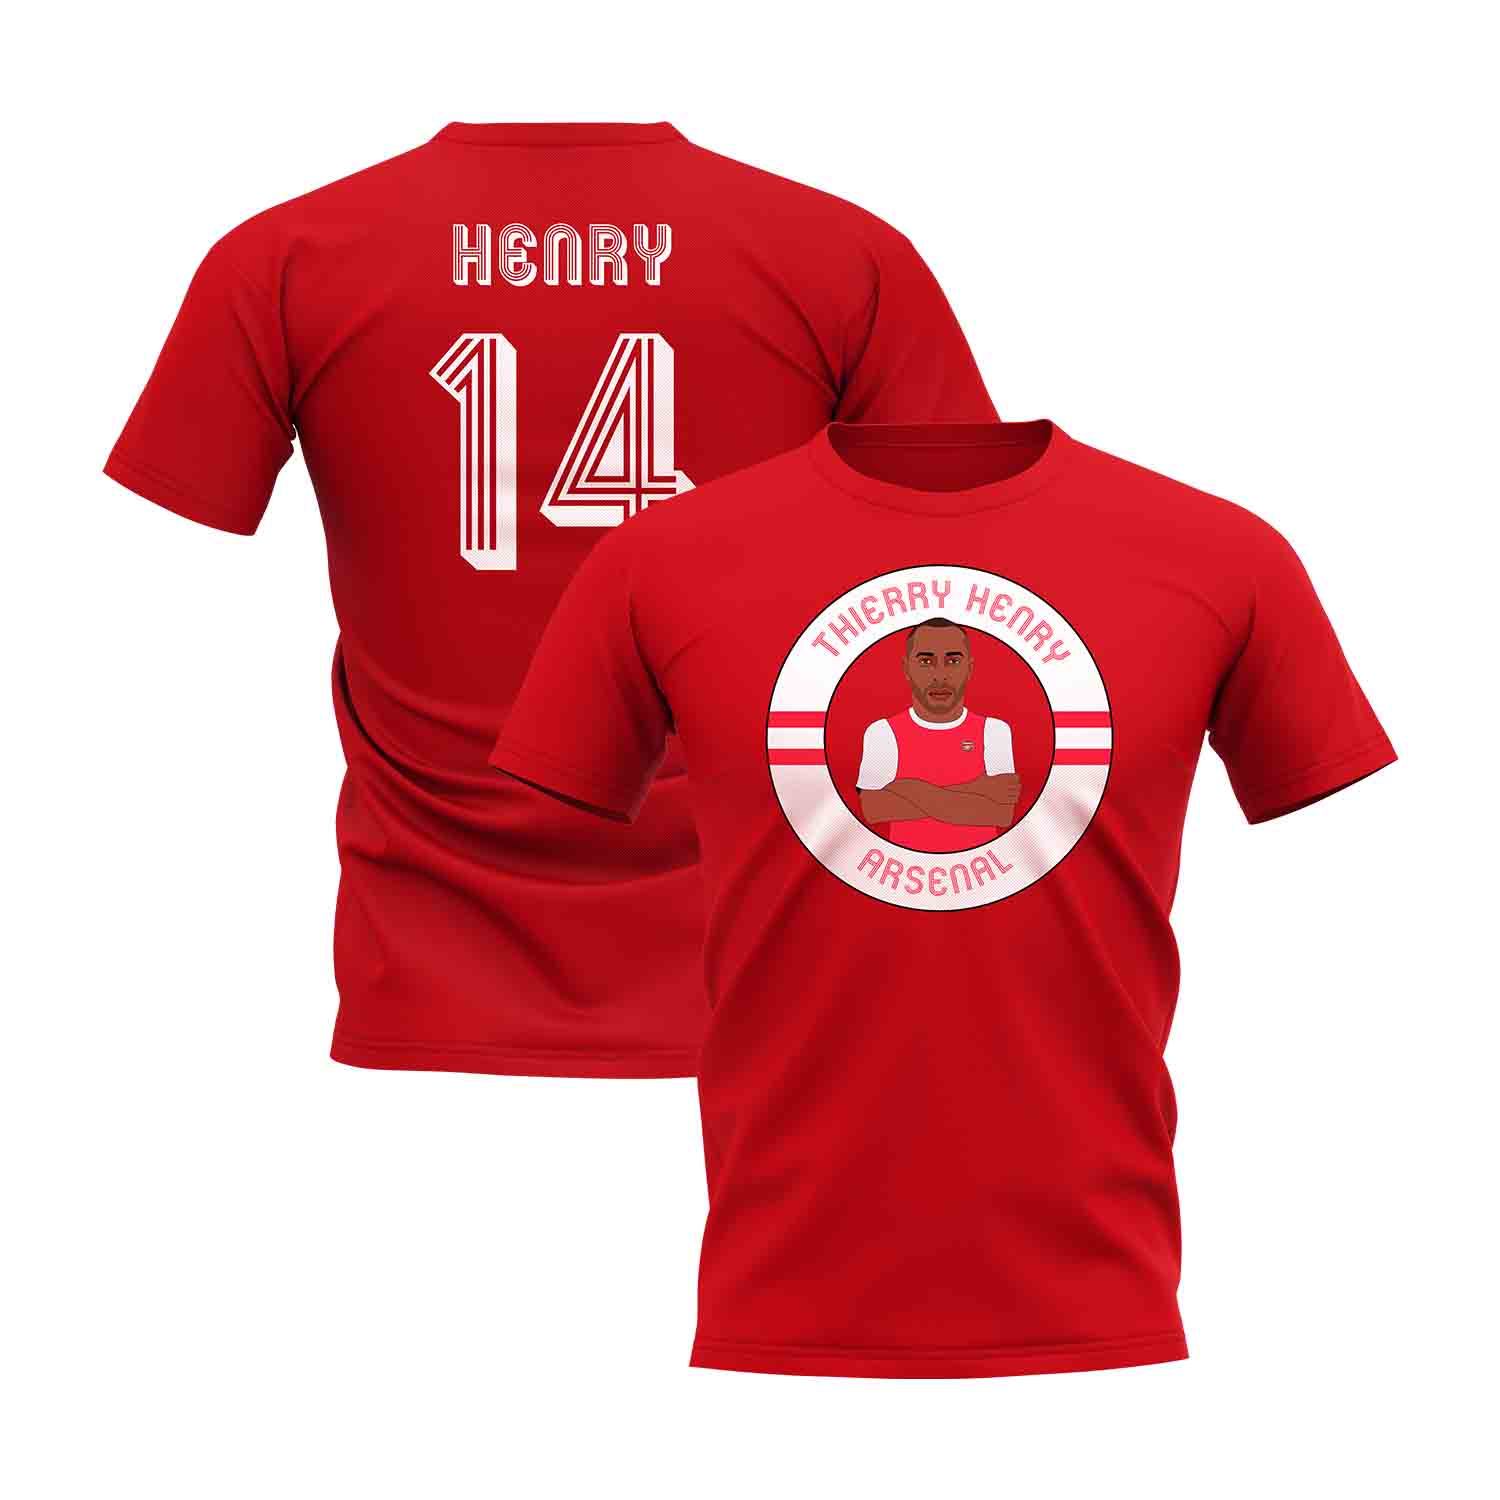 Thierry Henry Illustration T-Shirt (Red)